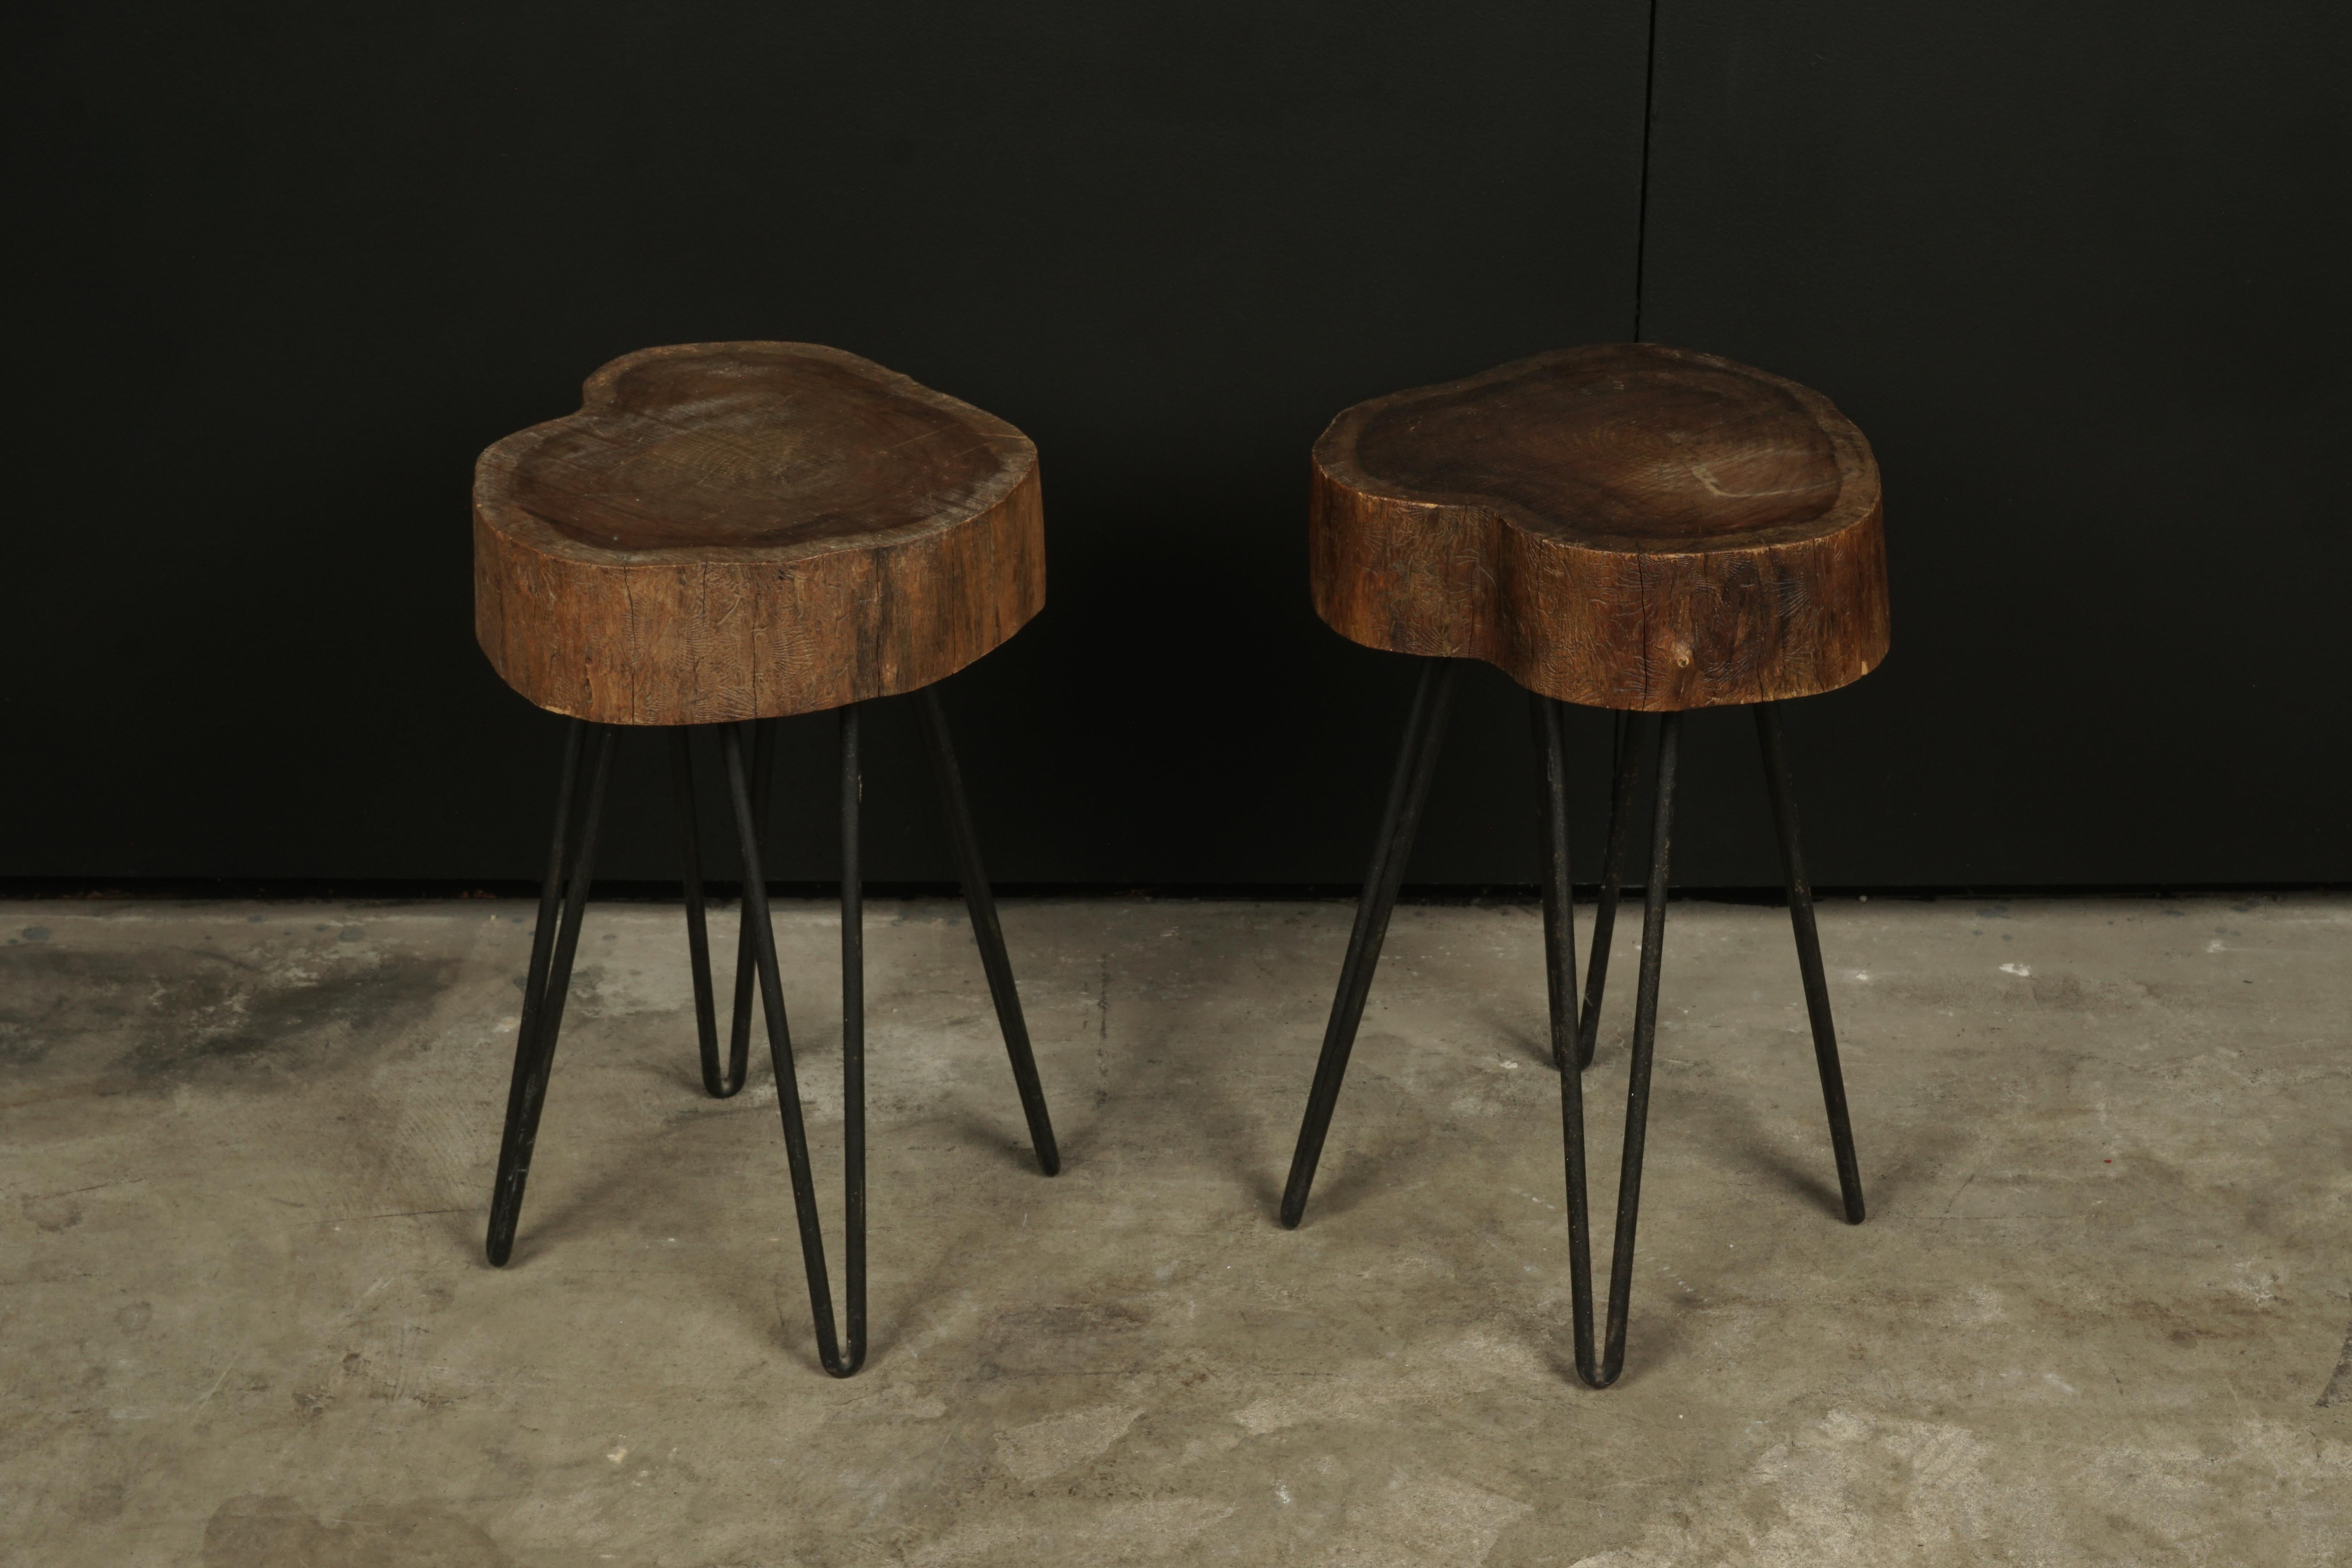 Vintage pair of tables from France, circa 1960. Solid wood top with metal hairpin legs. Nice wear and patina.